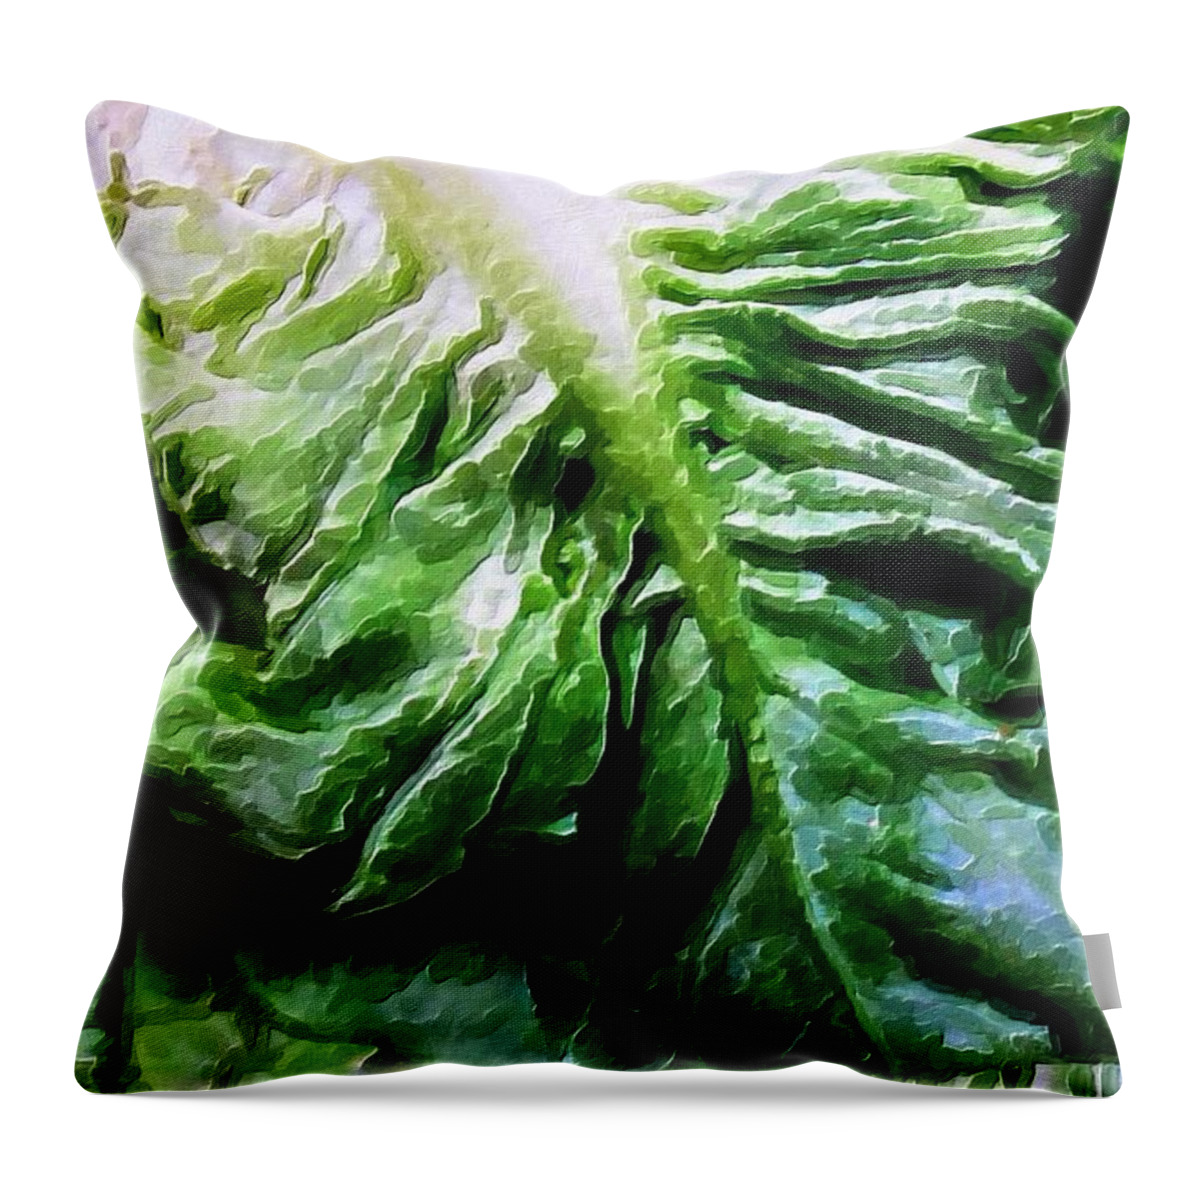 Green Lettuce Throw Pillow featuring the painting Lettuce by Joan Reese